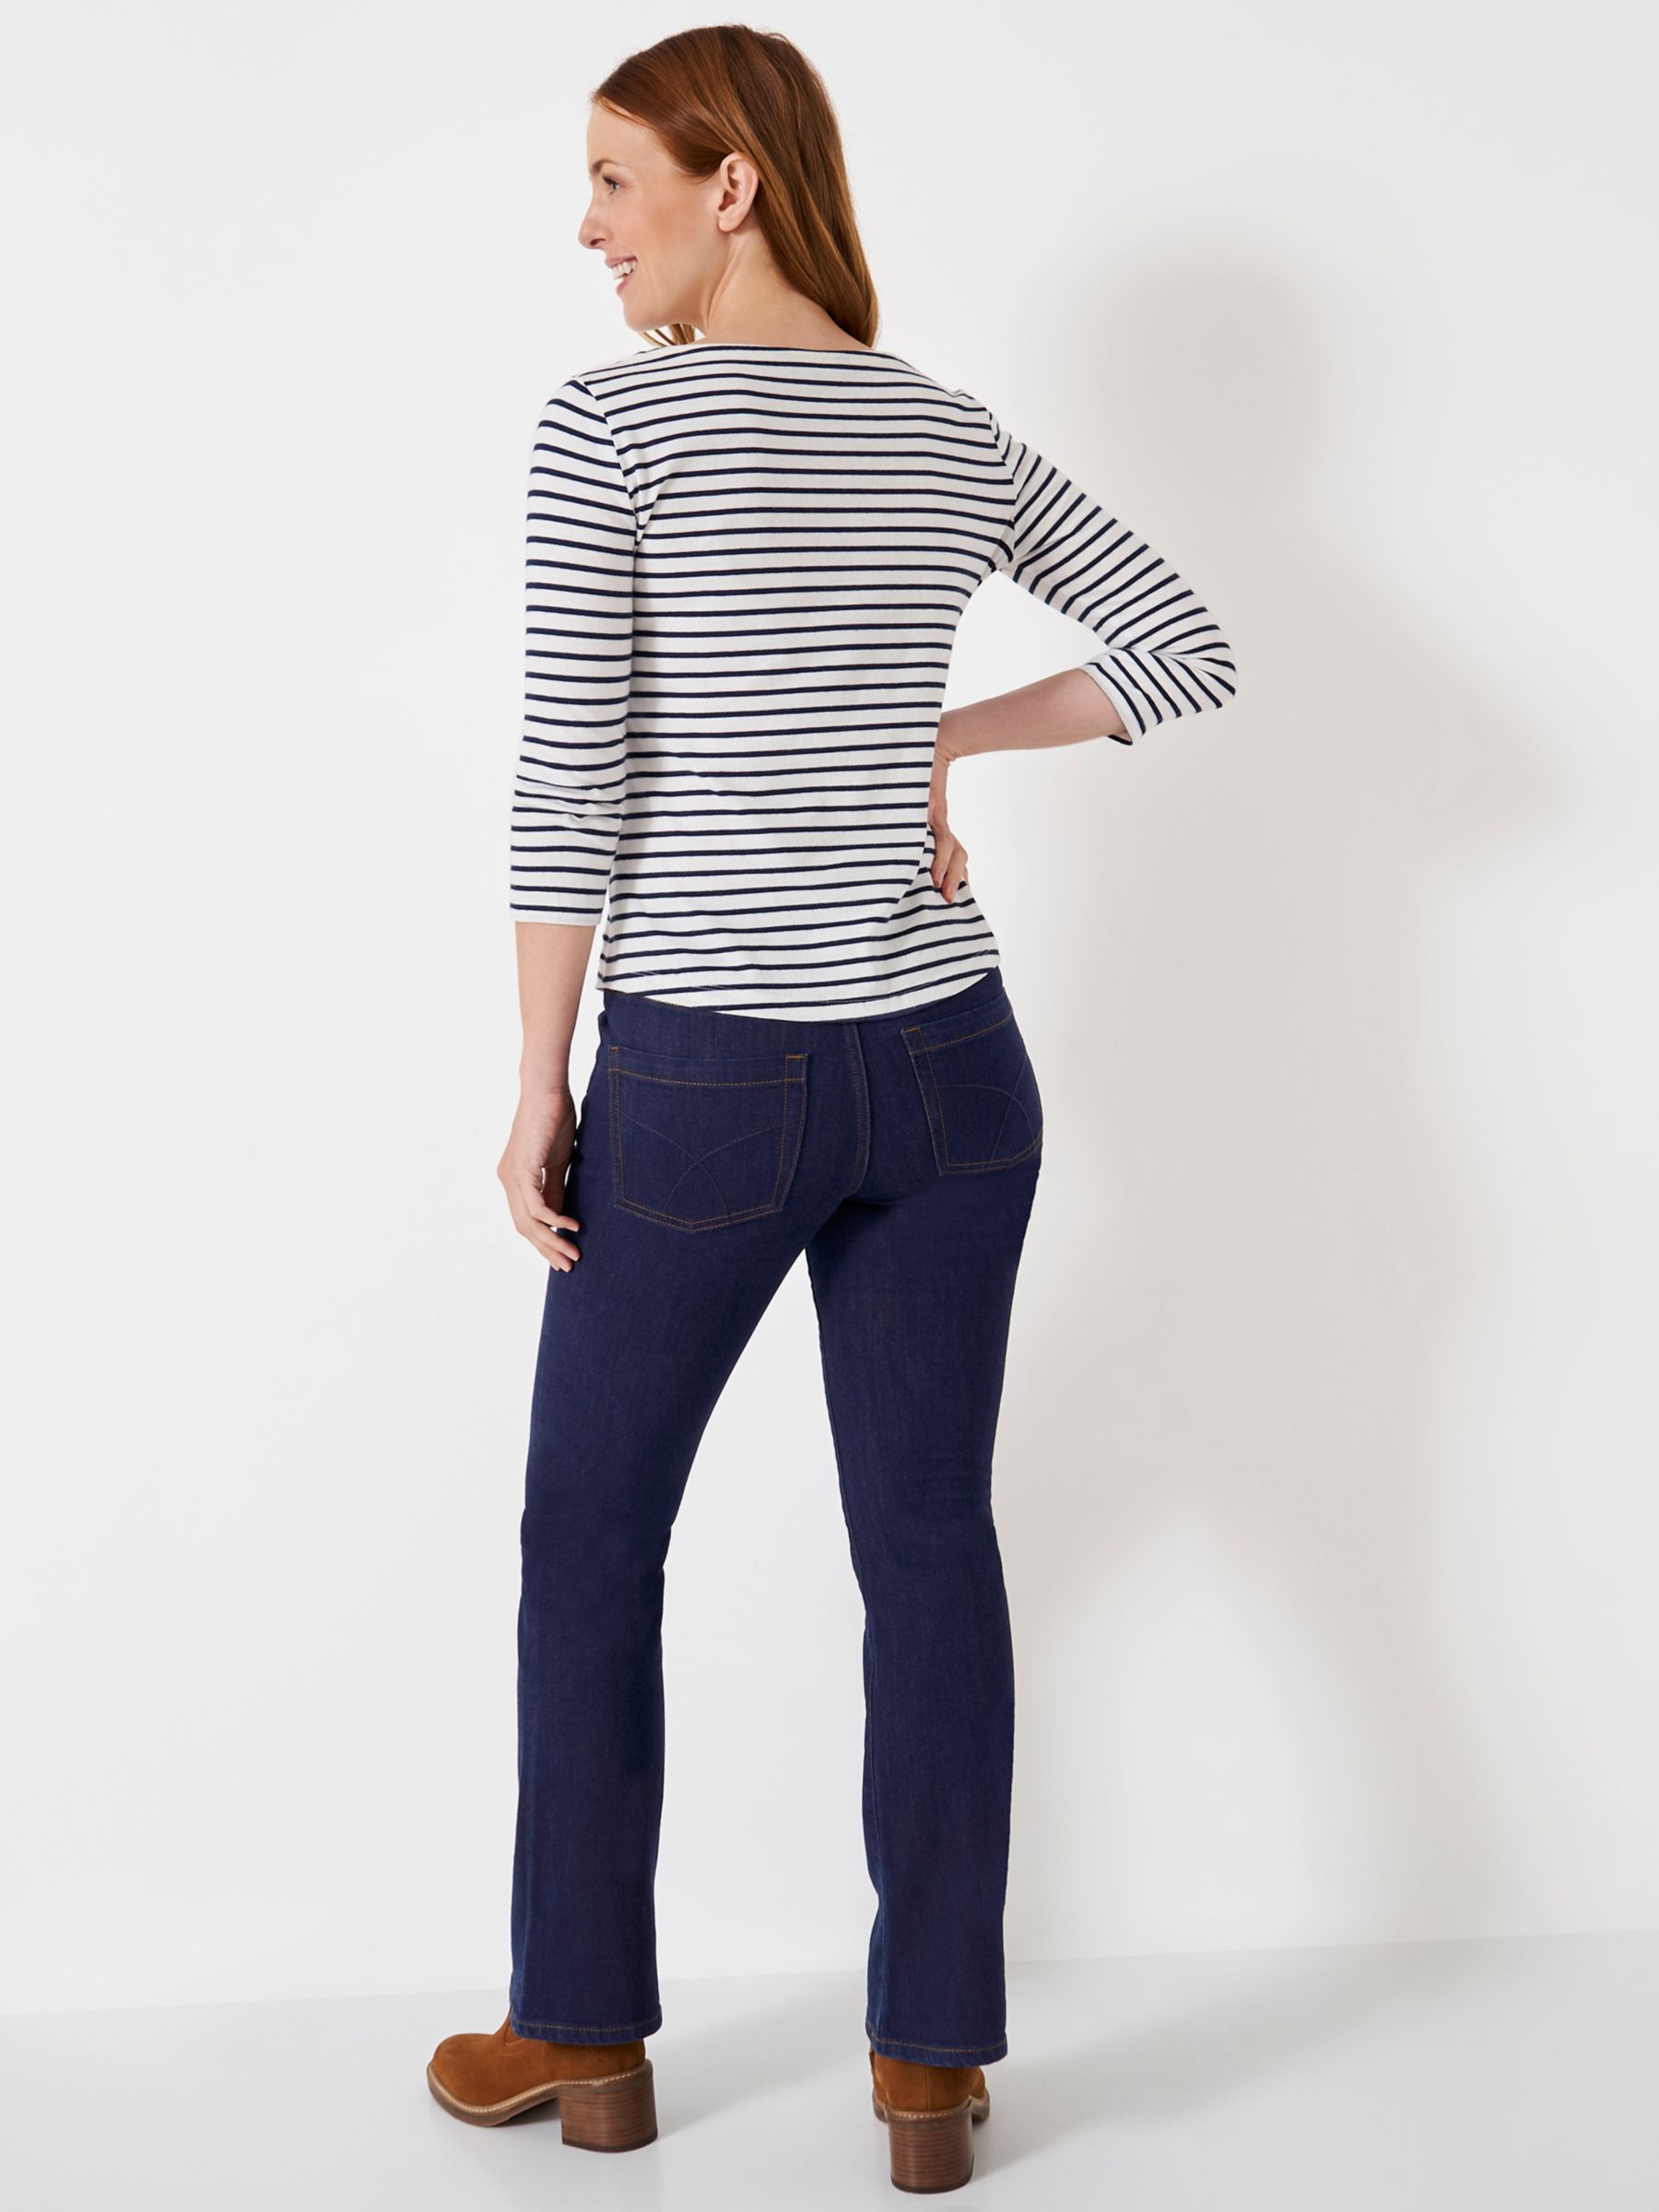 Buy Crew Clothing Bootcut Jeans, Blue Online at johnlewis.com